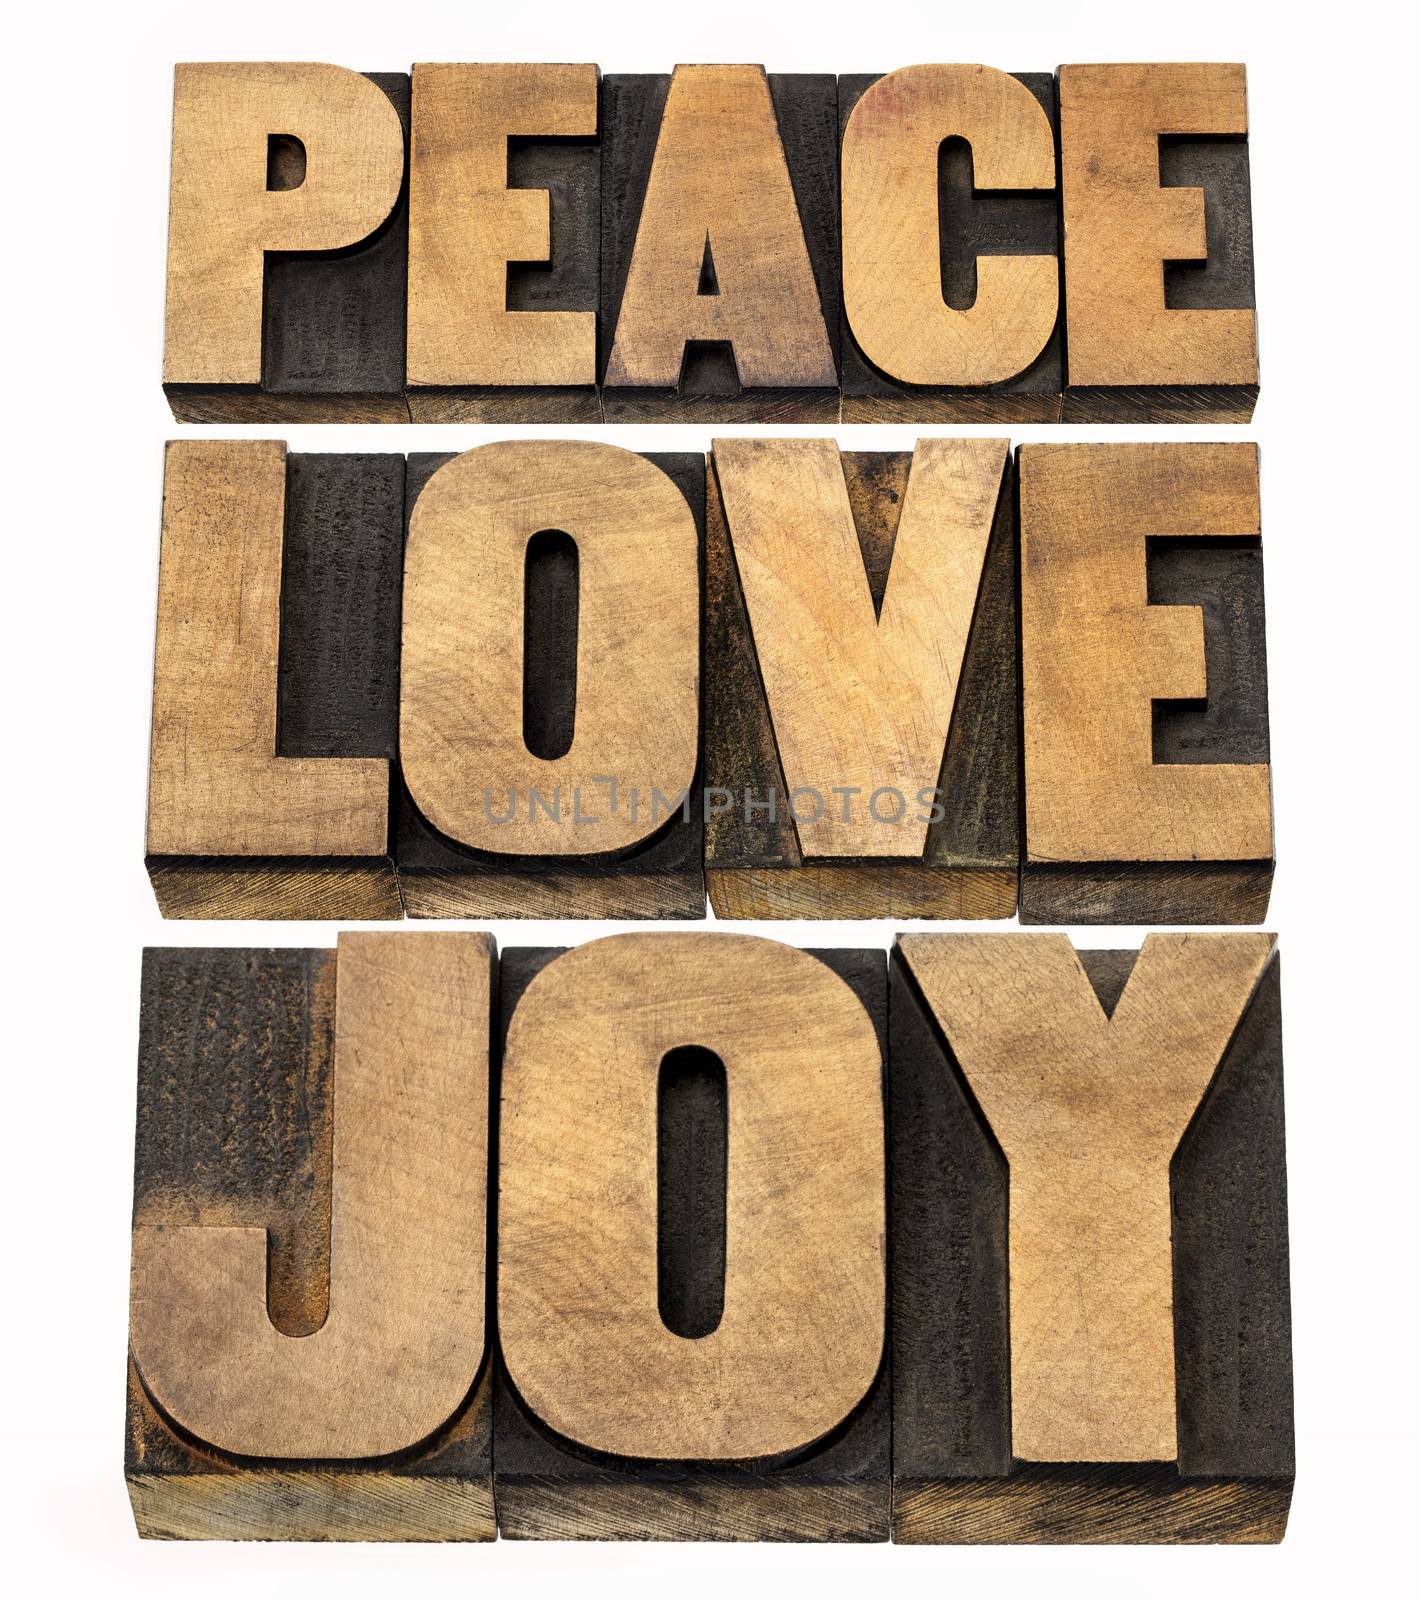 peace, love and joy word abstract - a collage of isolated text in letterpress wood type